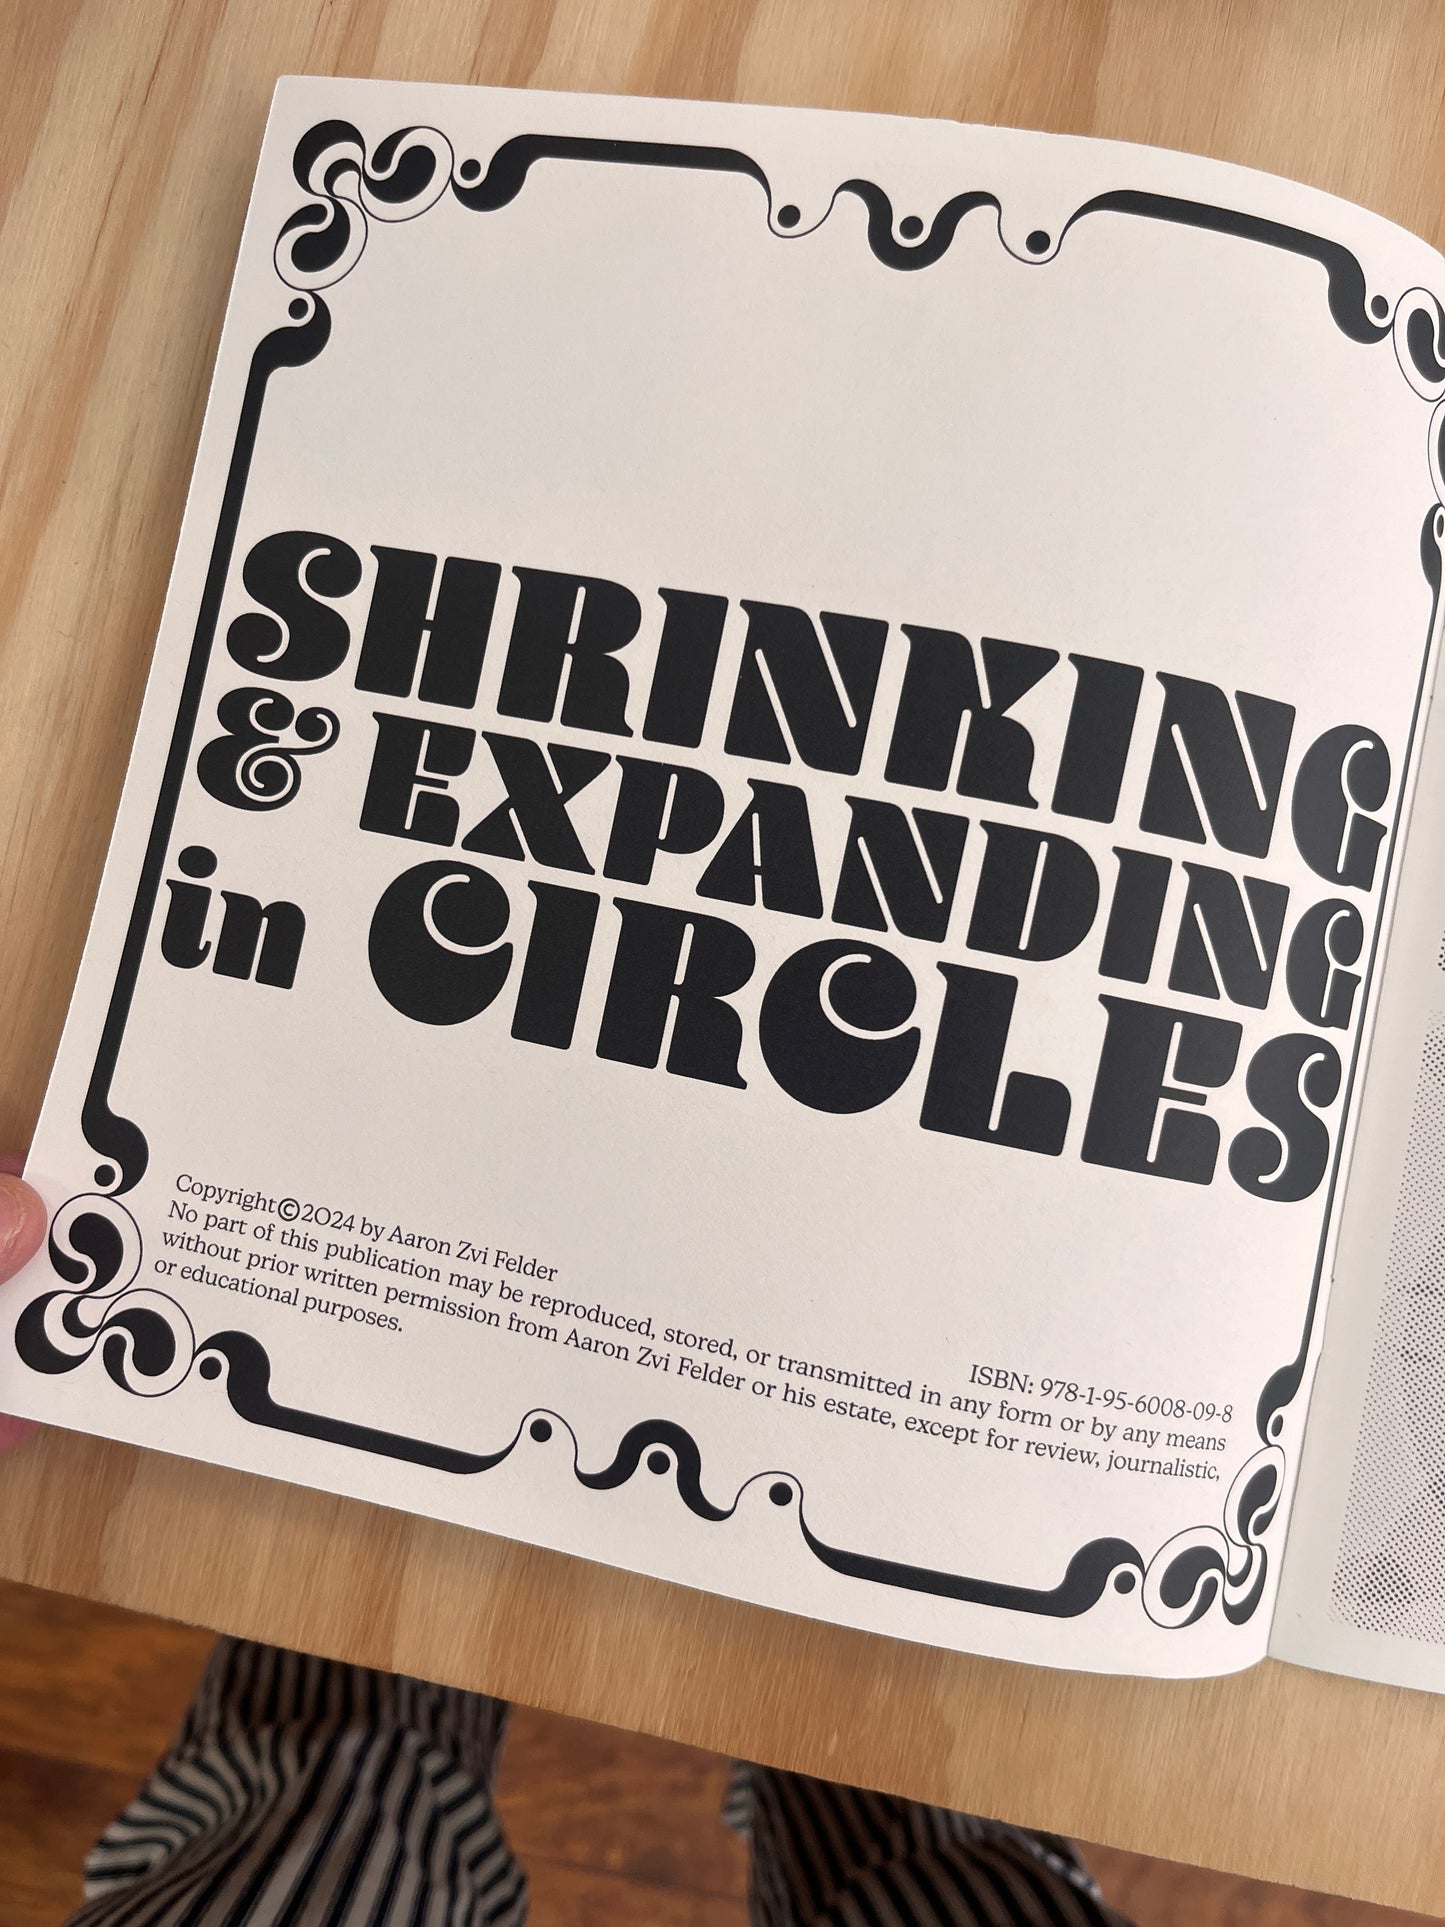 Shrinking & Expanding in Circles